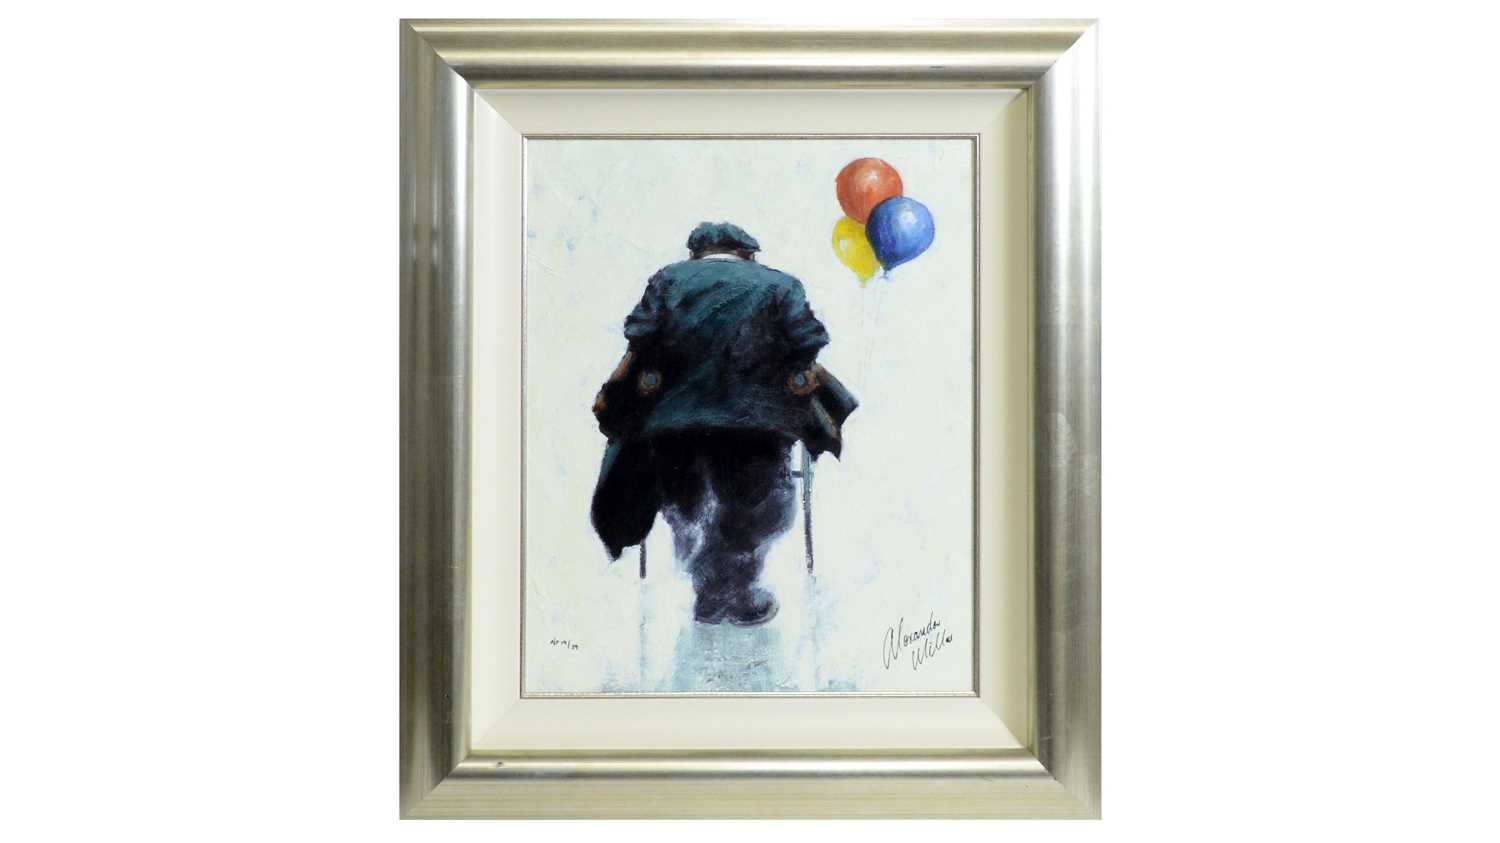 Lot 534 - Alexander Millar - The Balloon Seller | limited edition hand-embellished giclee